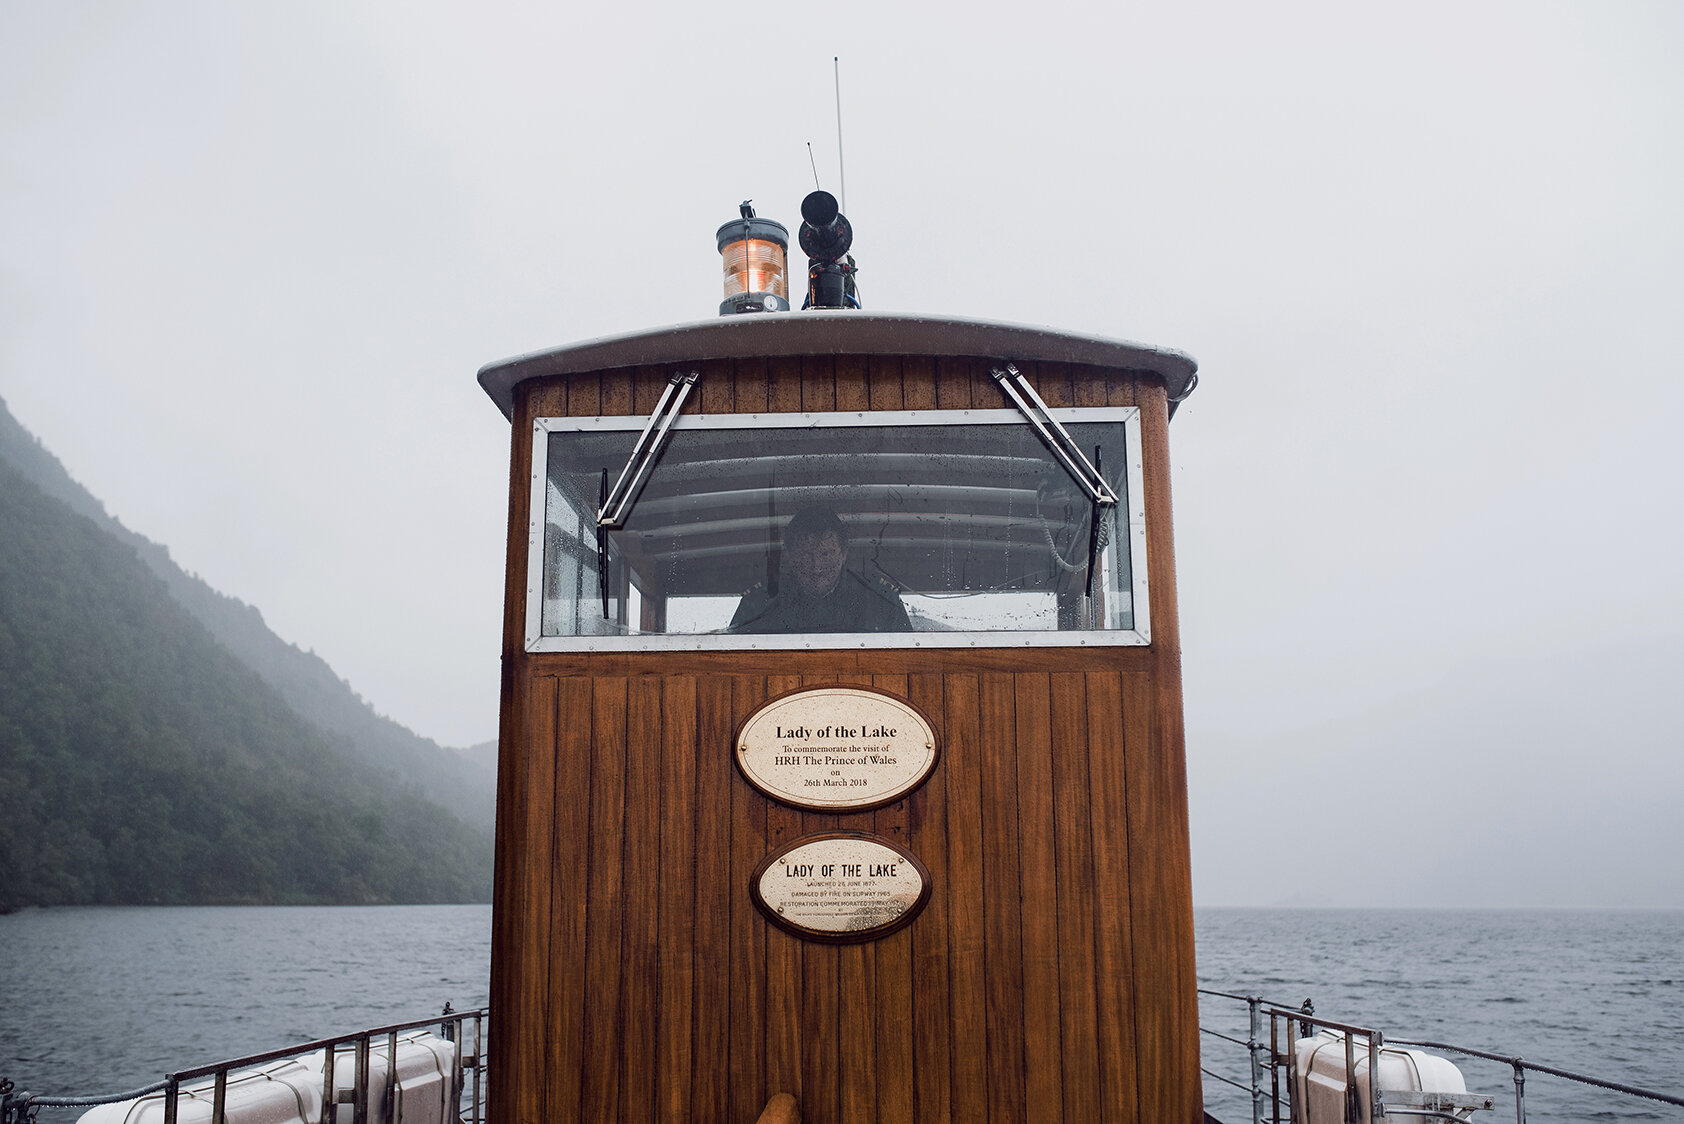 The top cabin of the lake steamer